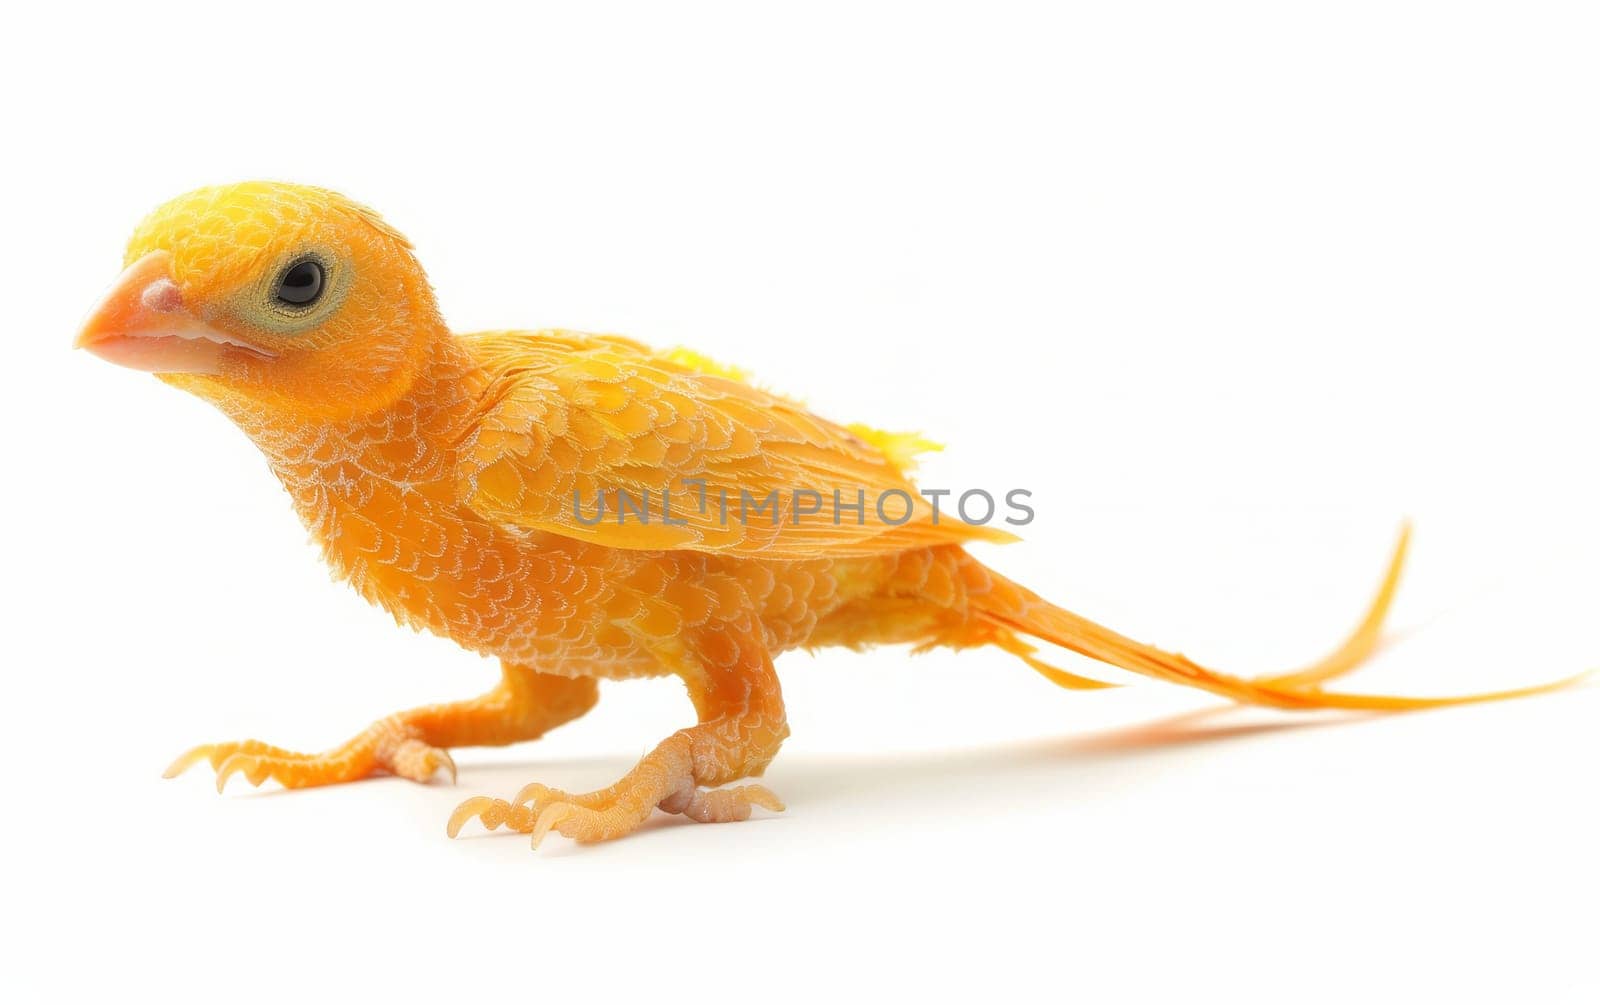 Unique hybrid creature with a blend of bird and reptile features, covered in bright orange feathers - canary chick. by sfinks